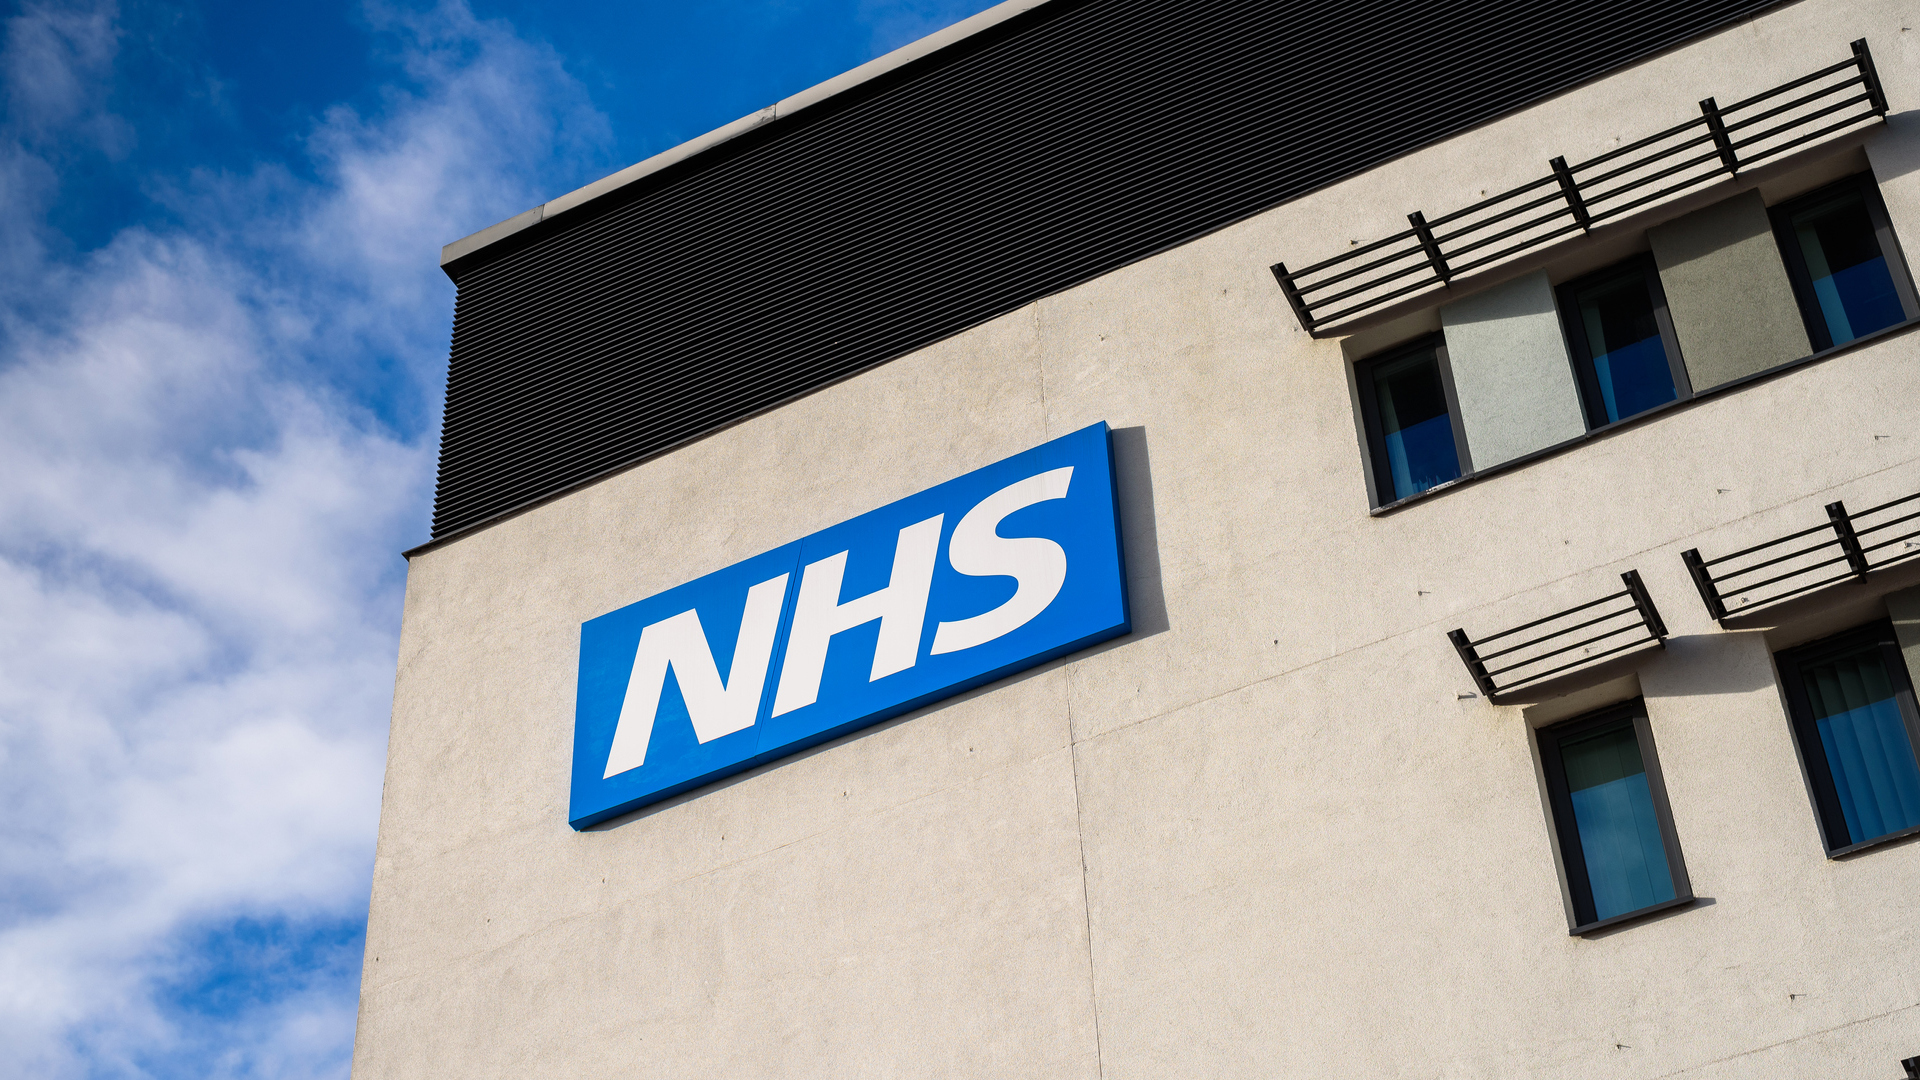 1.2m patients to benefit from improved NHS space in England